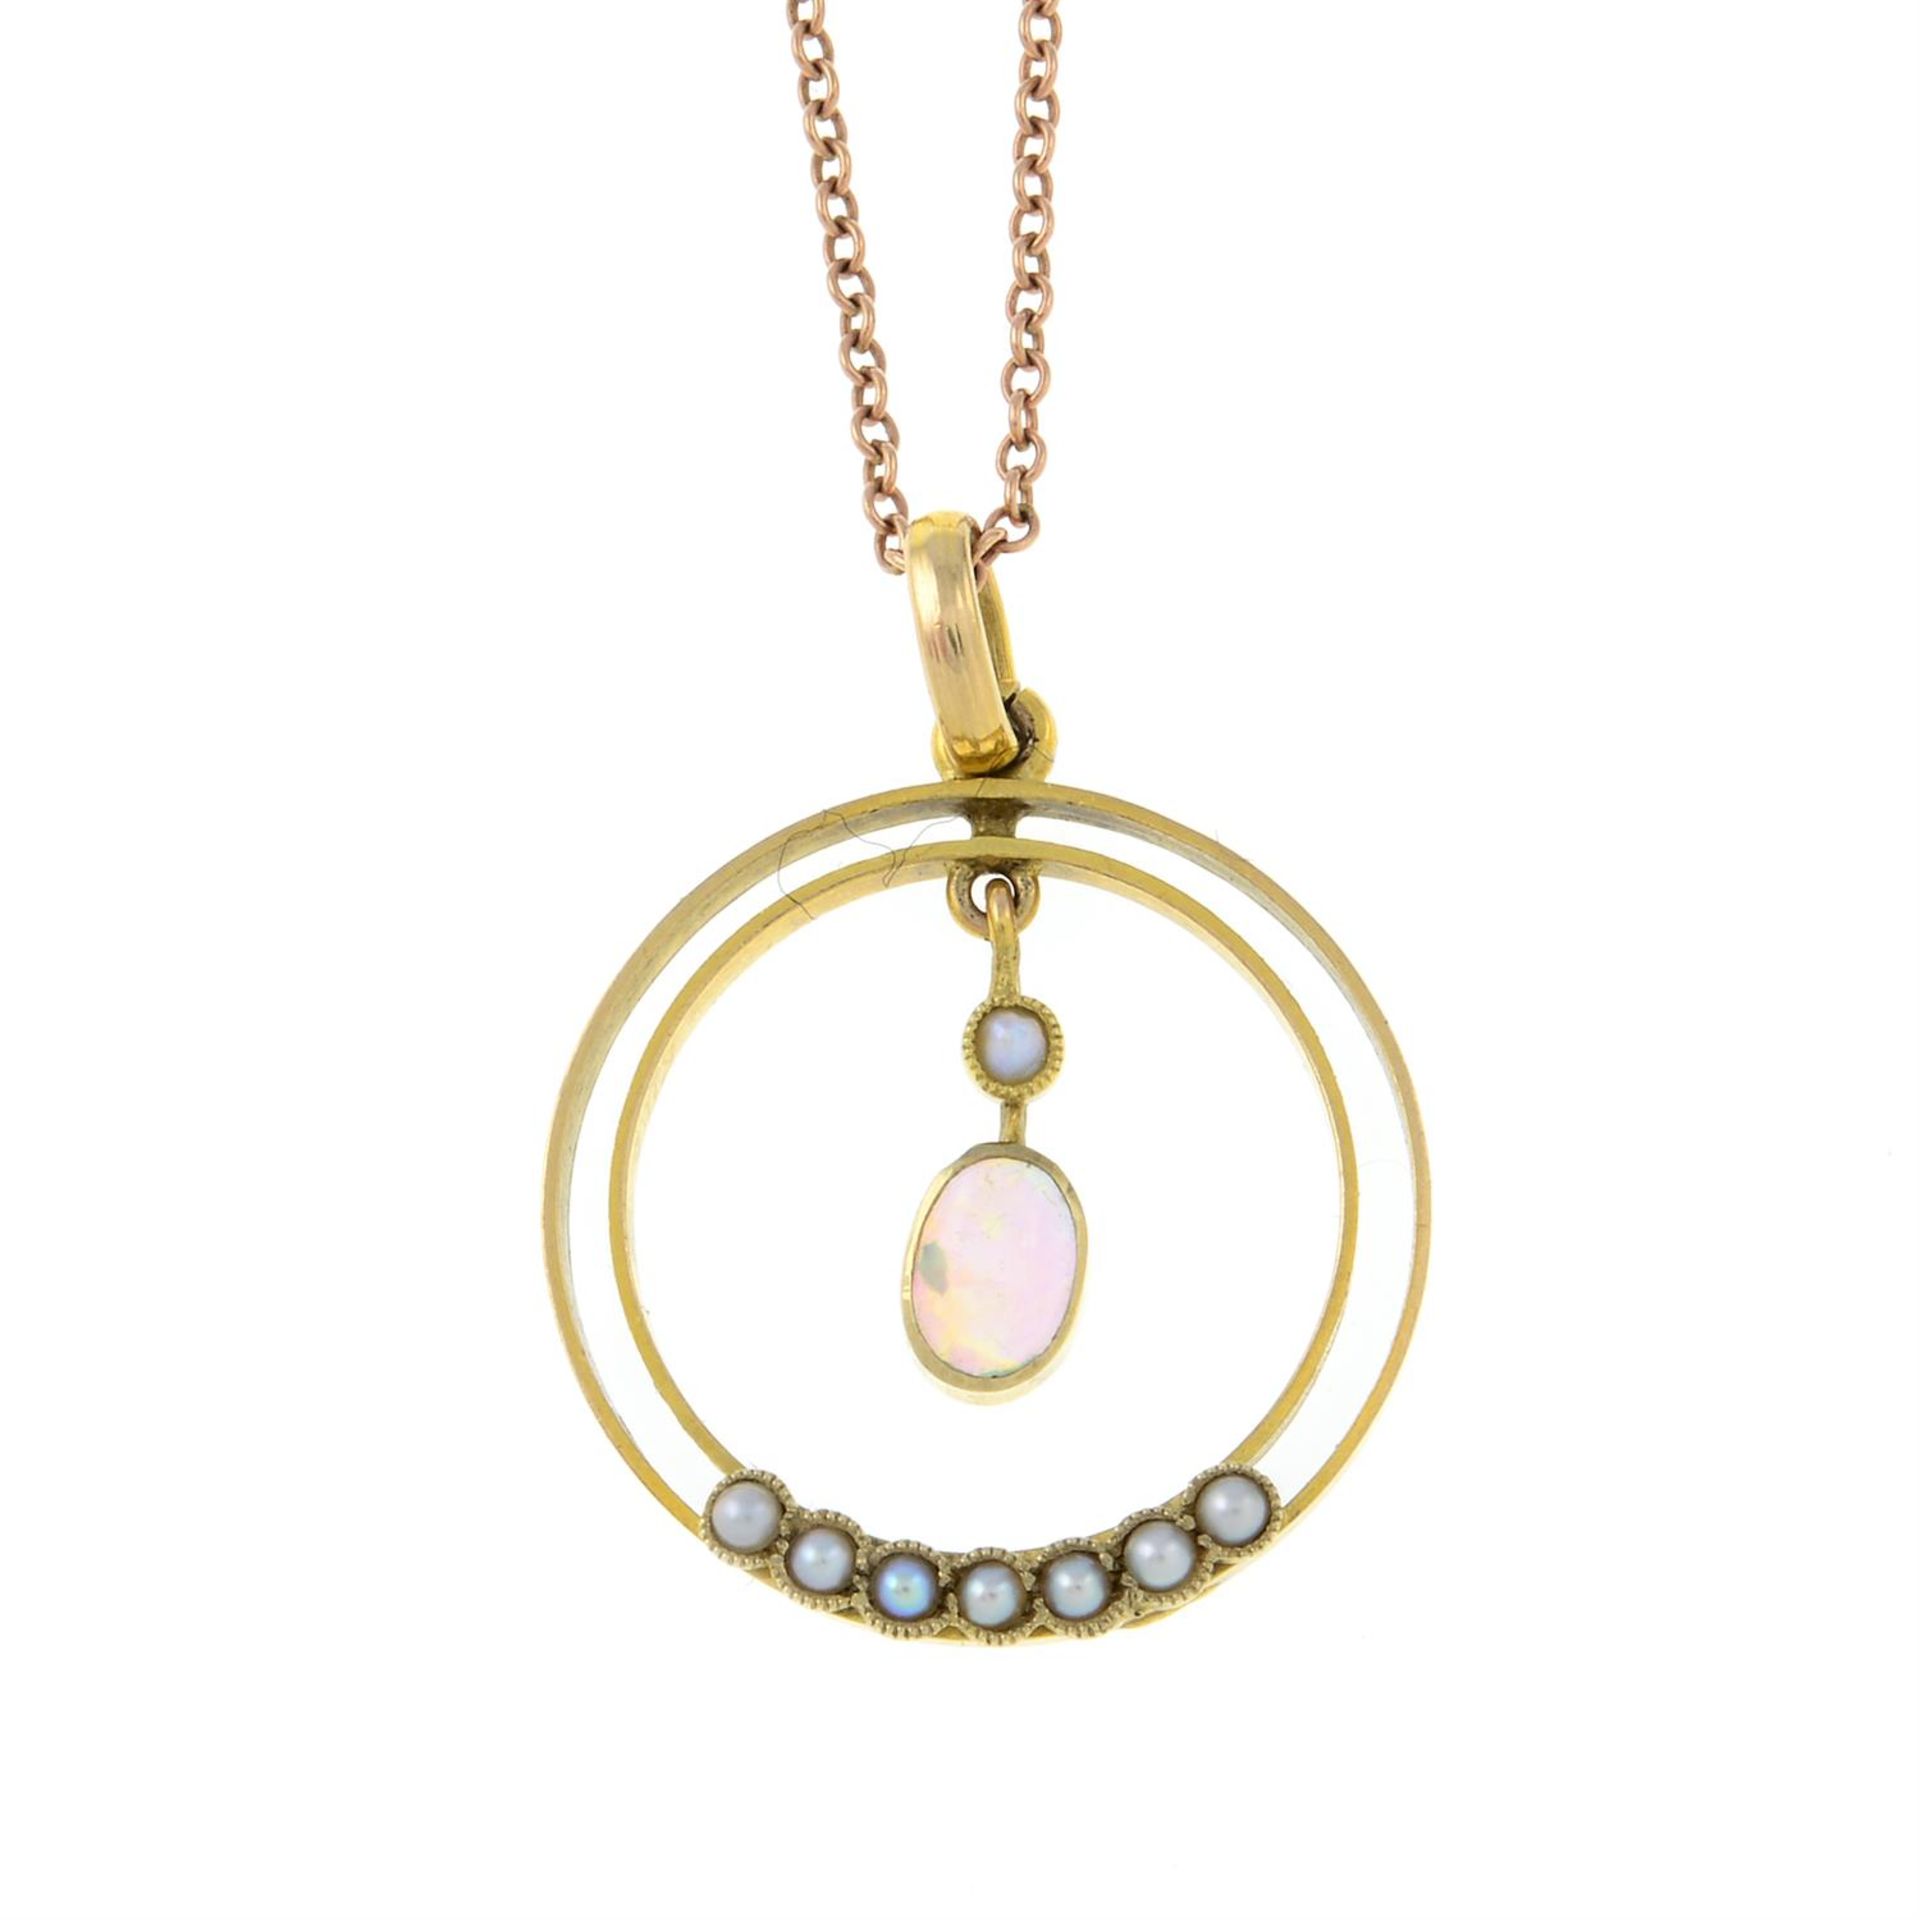 An early 20th century 9ct gold opal cabochon and seed pearl pendant, with chain.